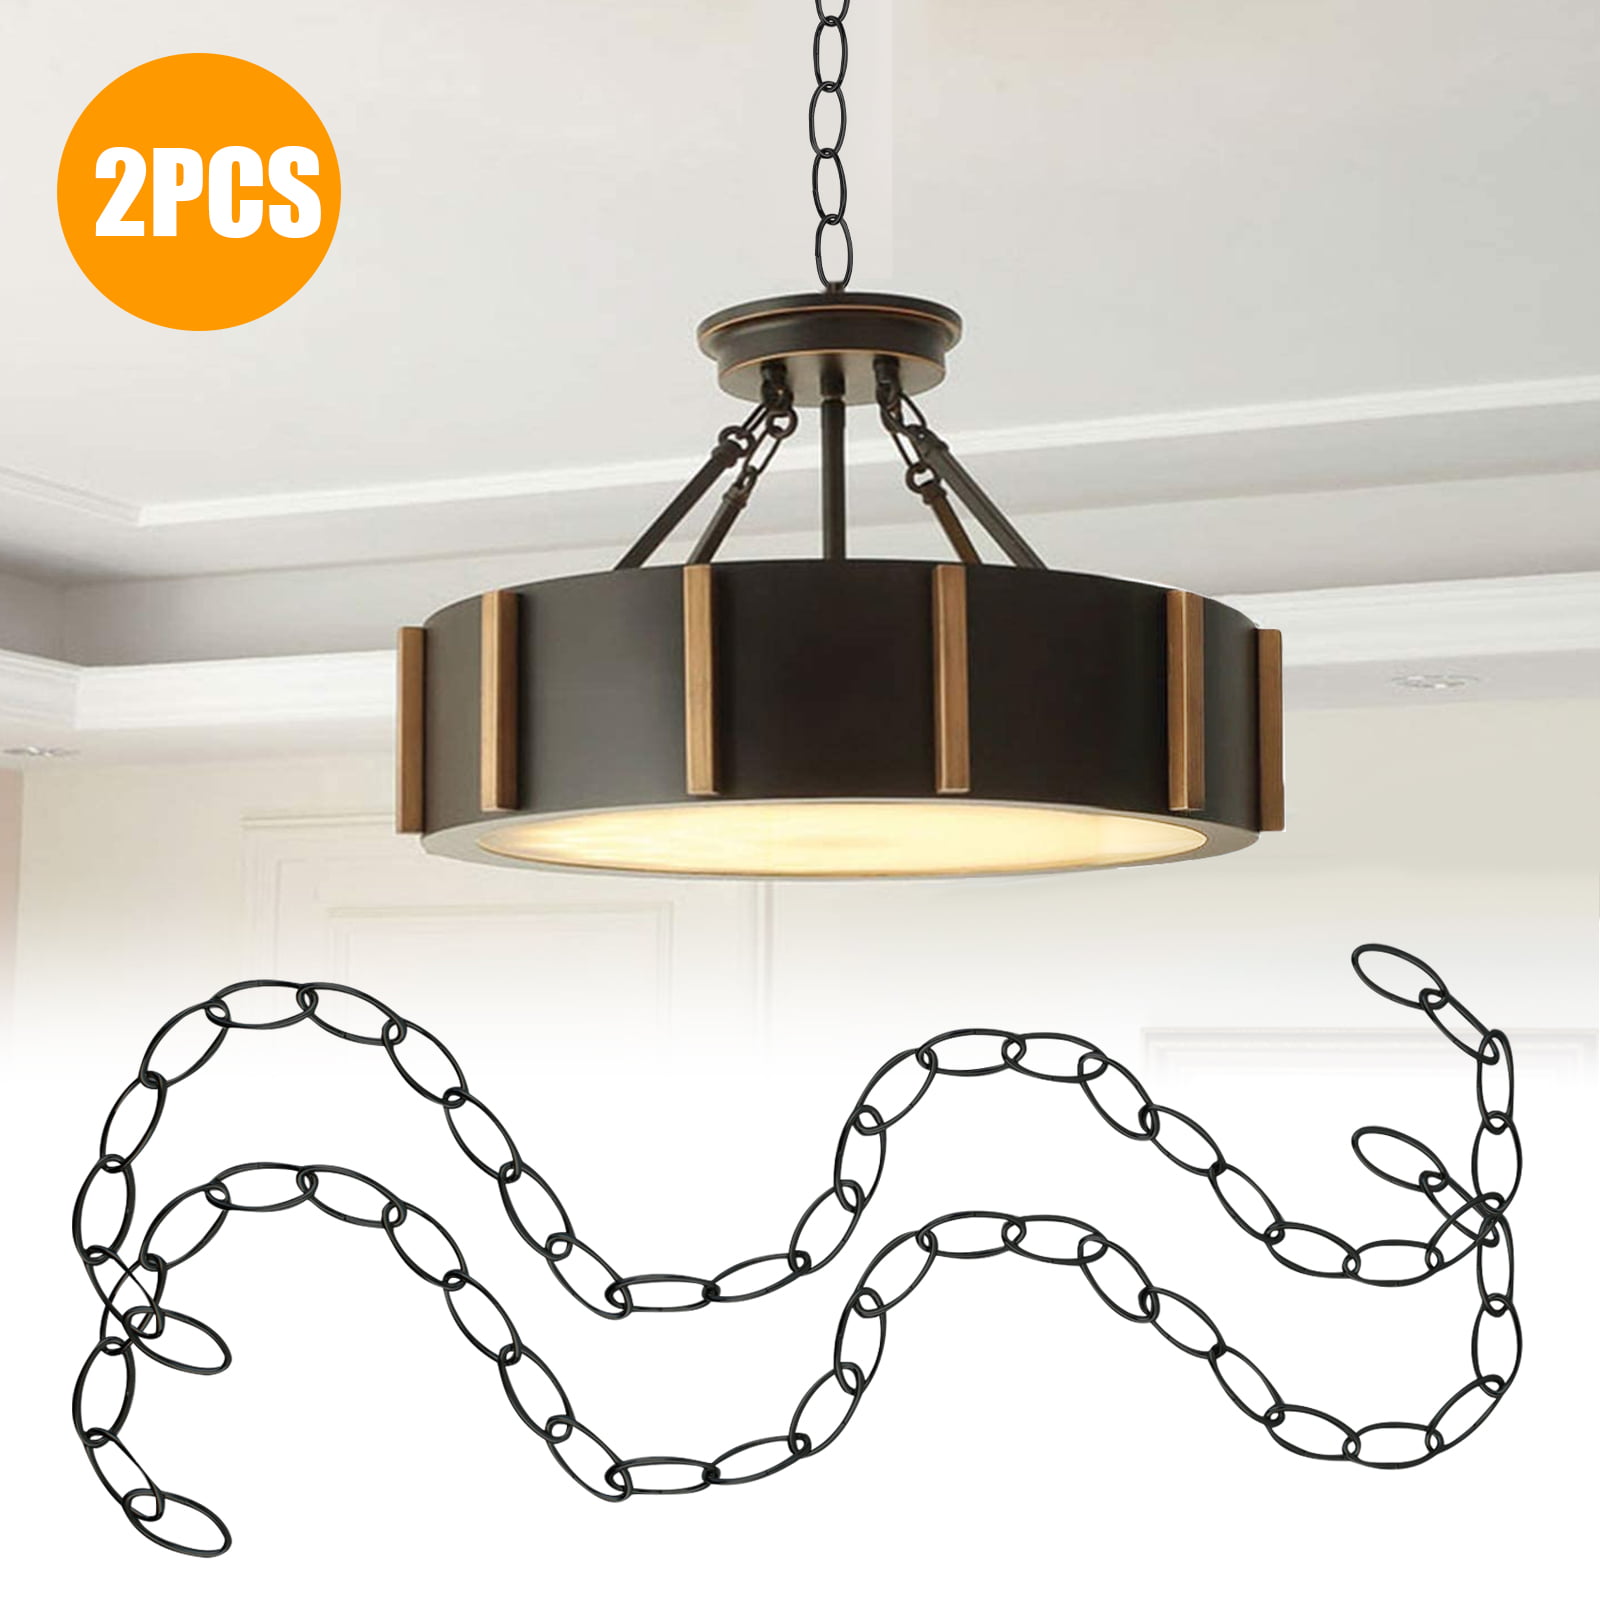 2pcs Chain Extension Tails Tsv 40inch, How Do You Install A Hanging Light Fixture With Chain